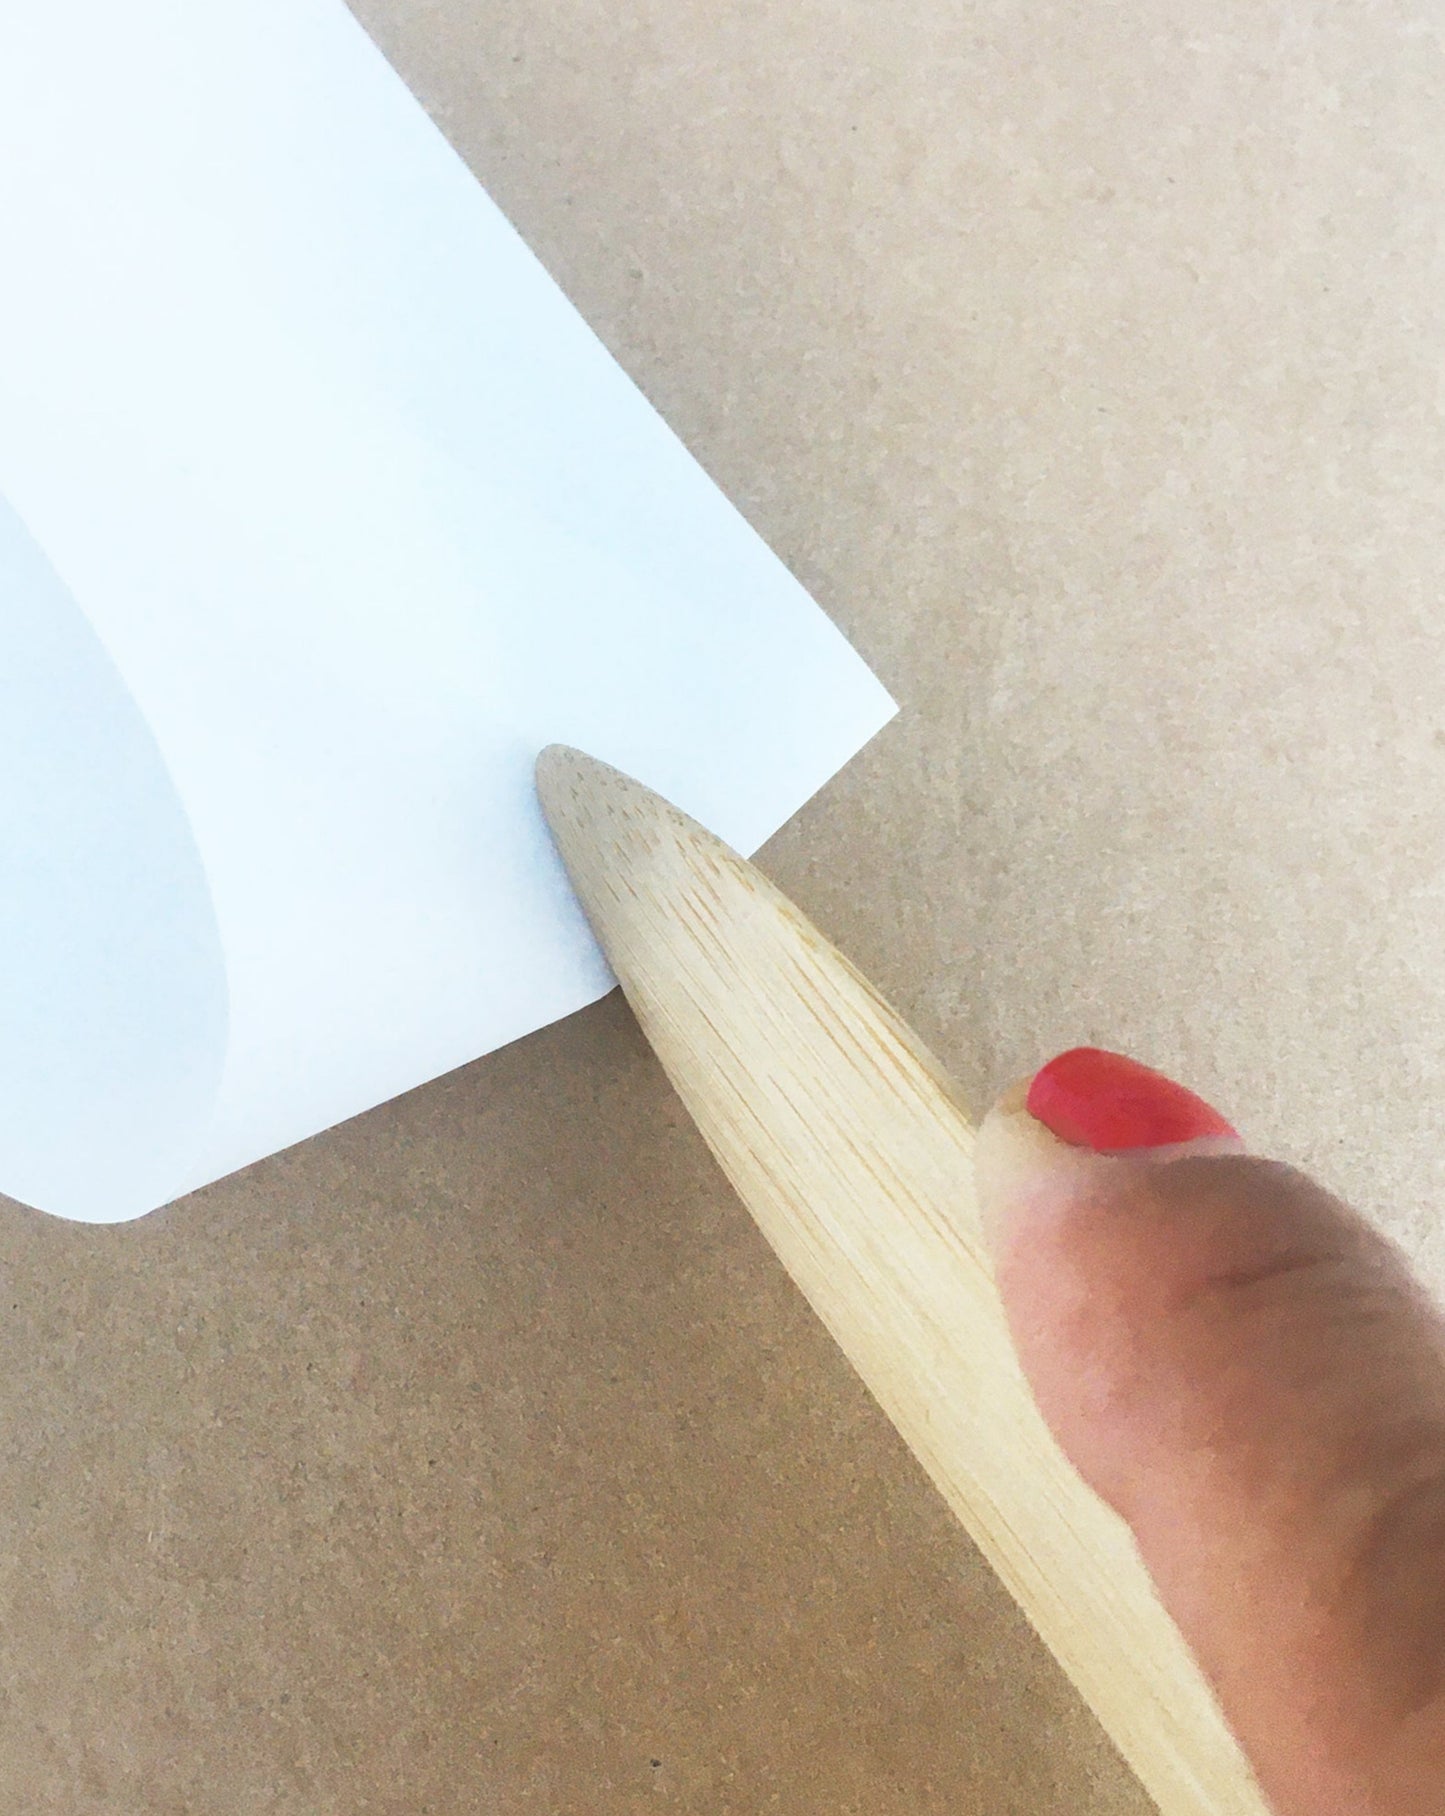 Example image of a seam creaser, folding a piece of paper for the crisp and clean edge